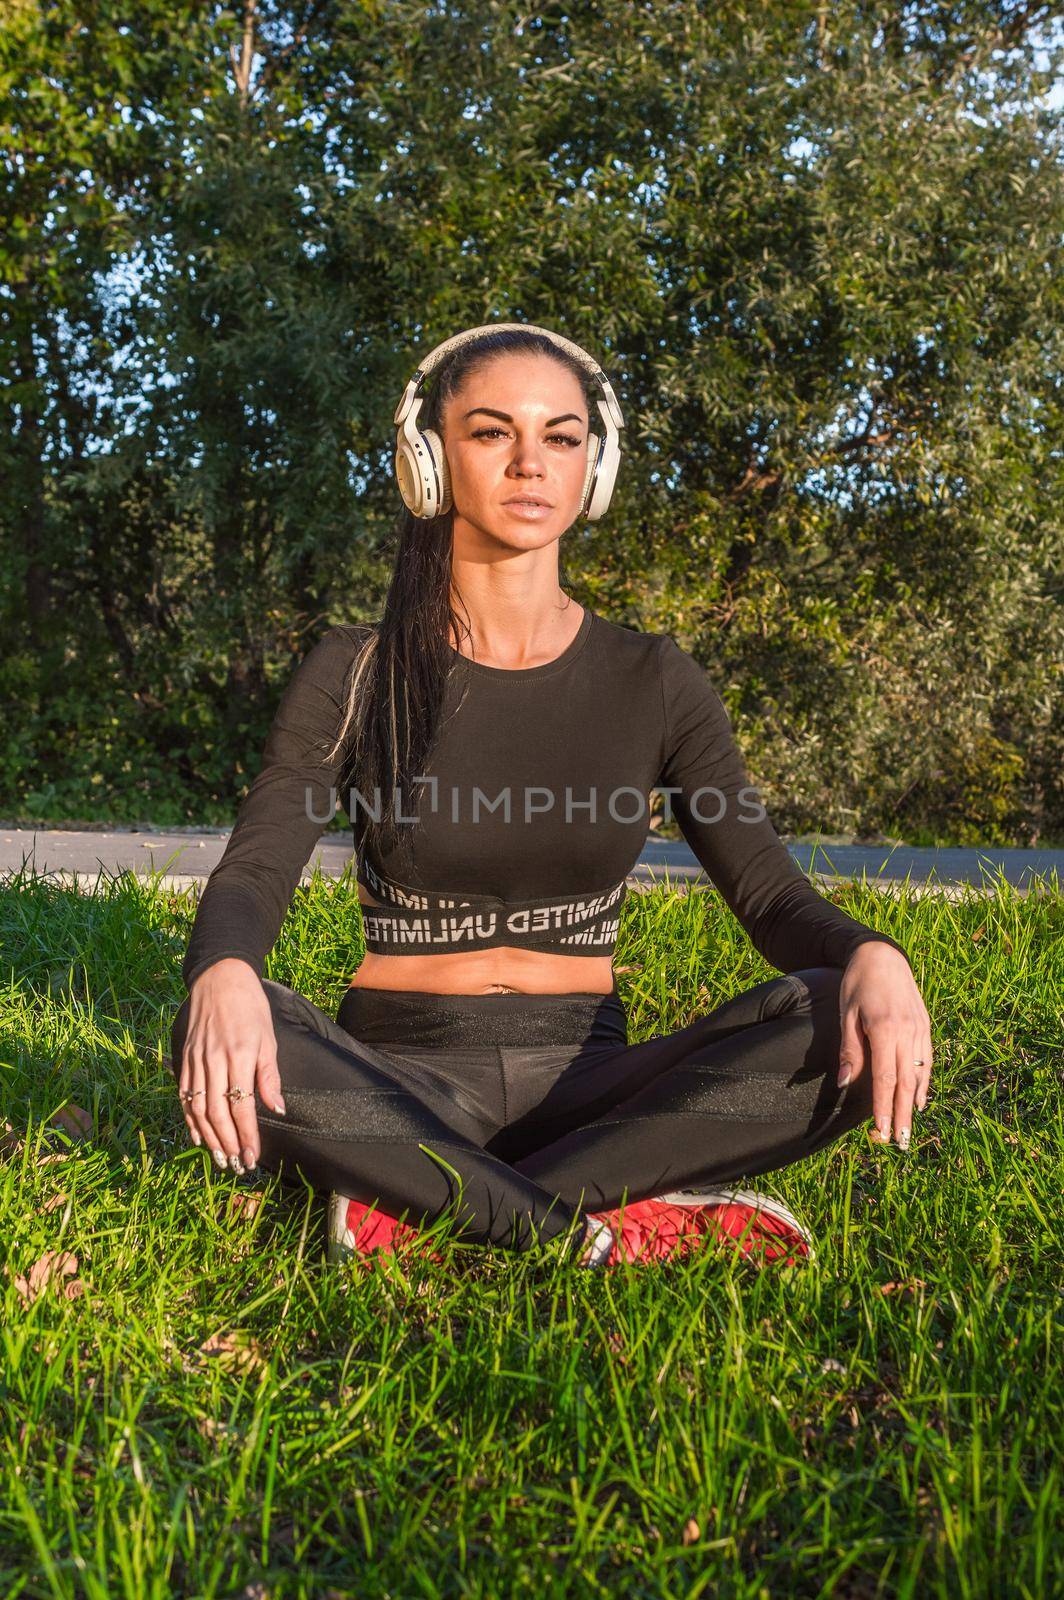 Girl - music lover lying and relaxing with headphones./Pretty young woman in headphones listening to music.